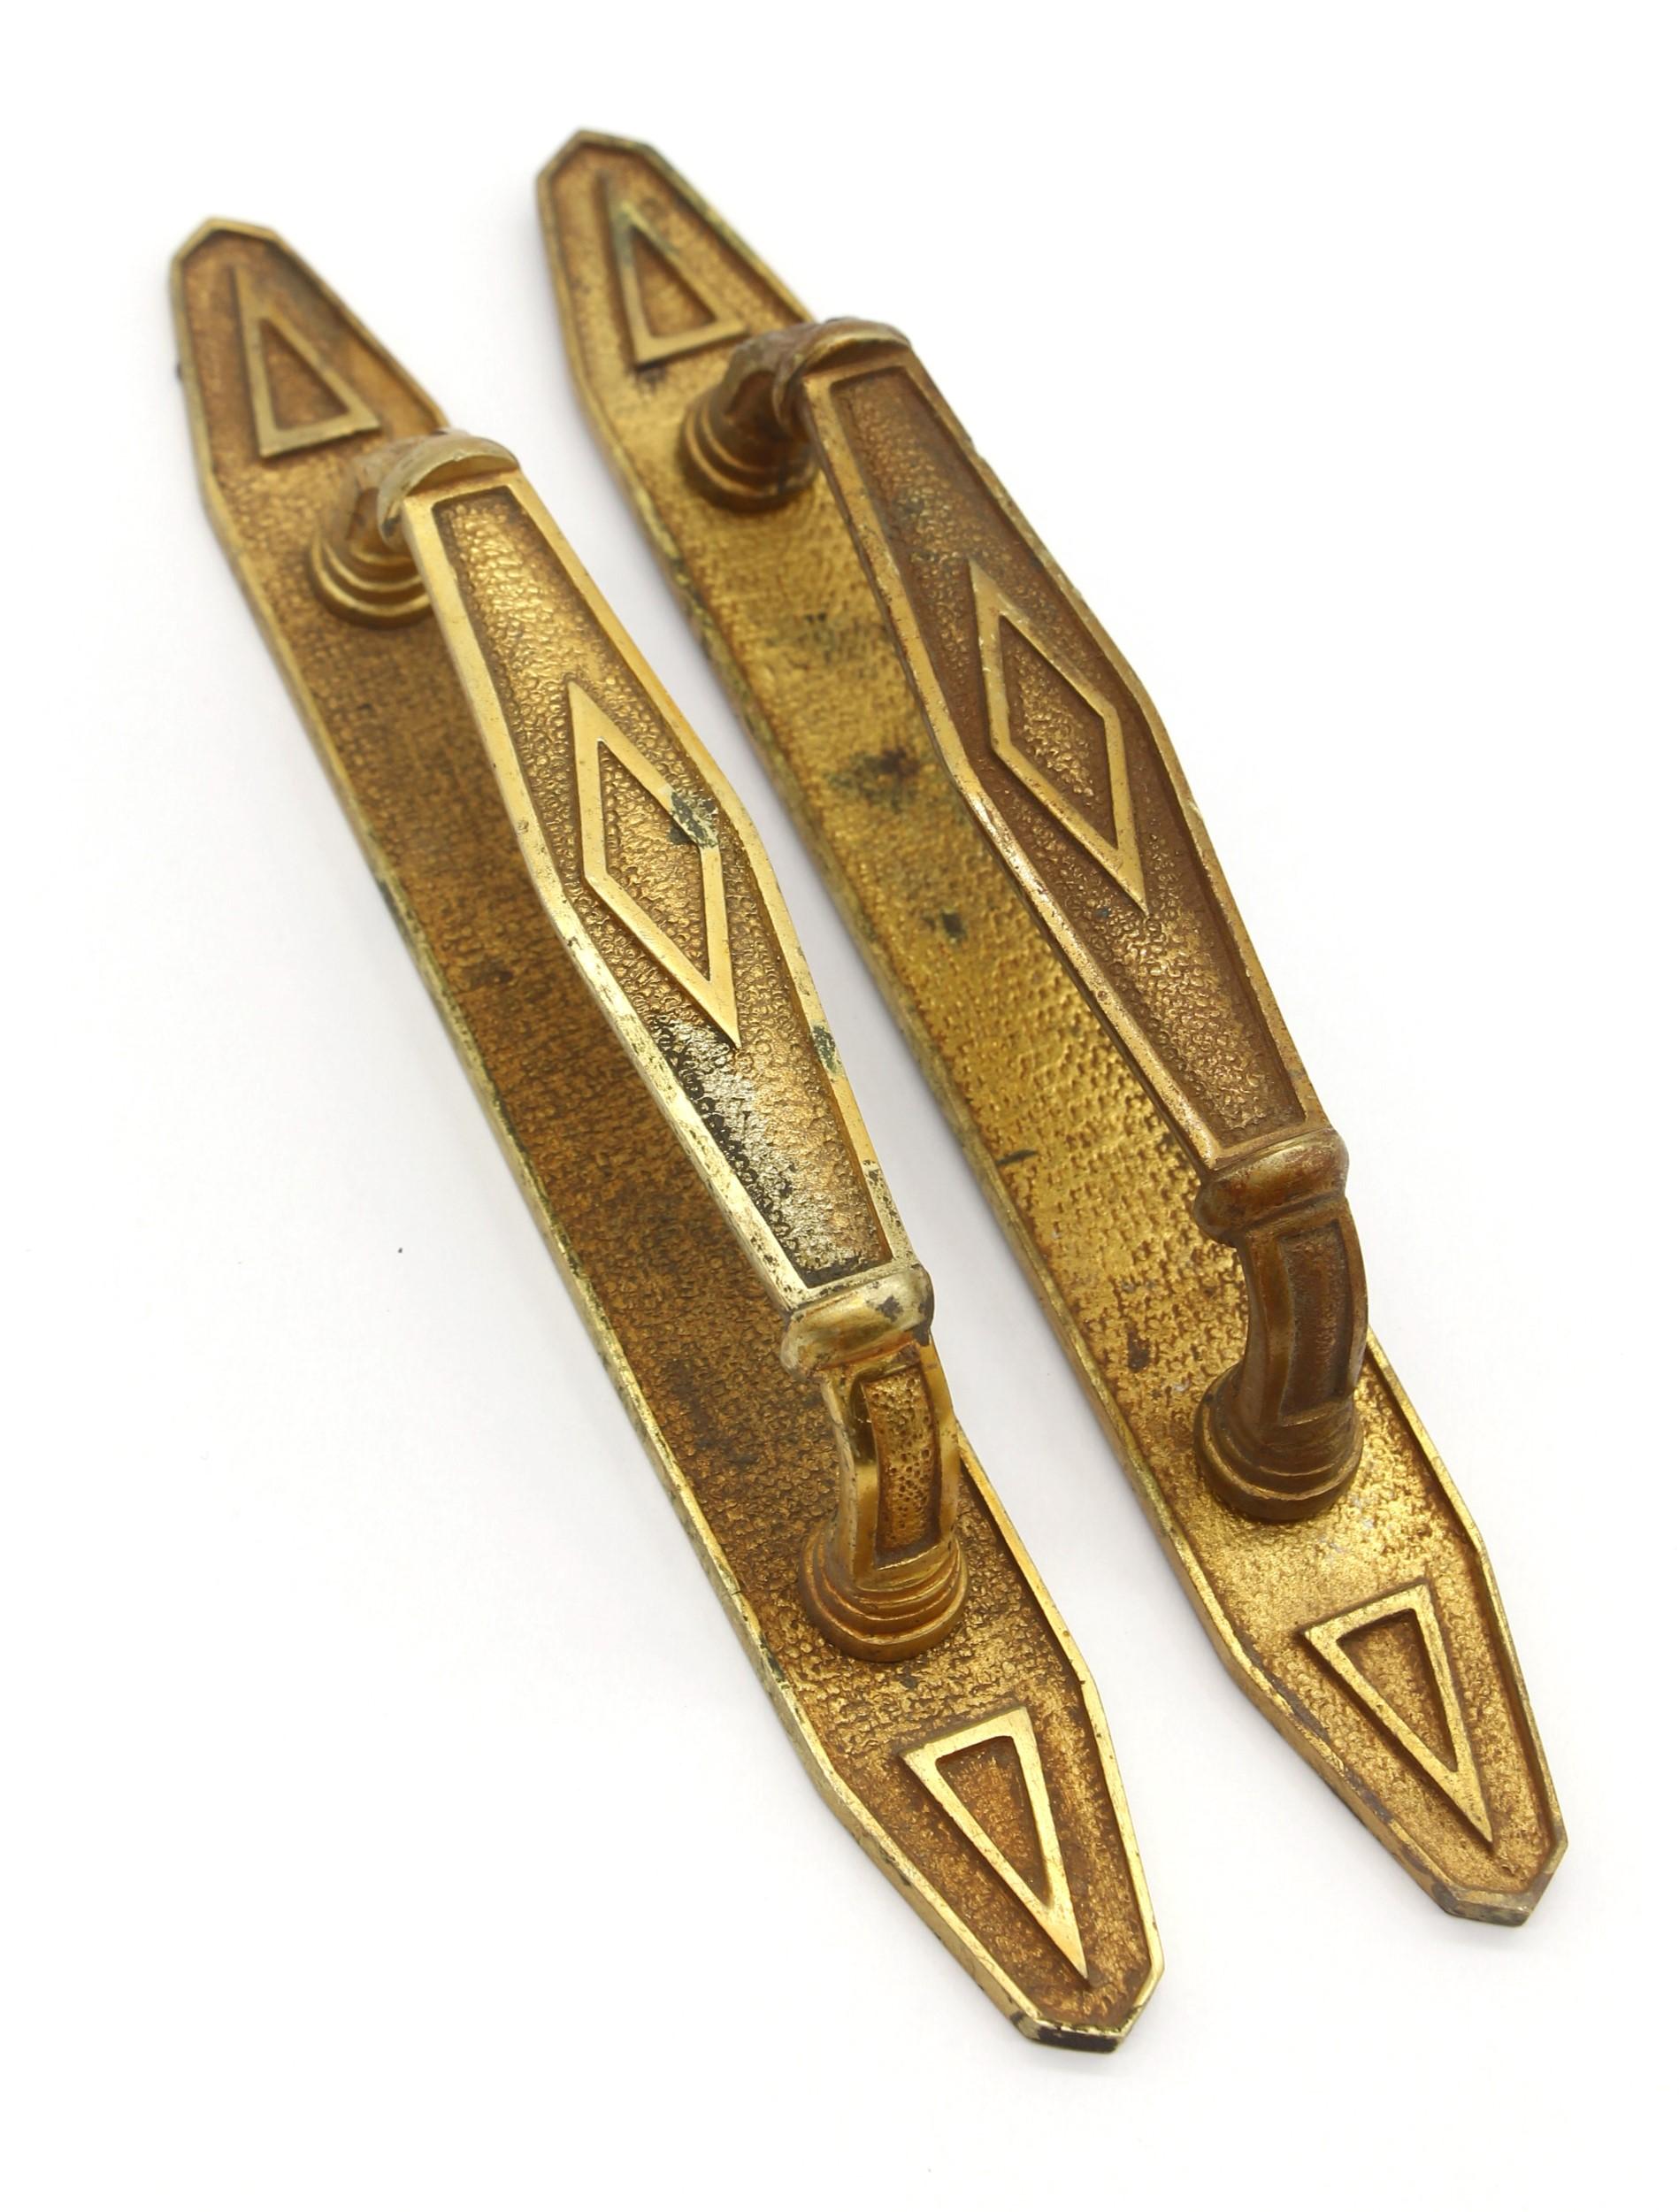 This pair of petite bronze Art Deco door pulls were imported from Europe. They feature a geometric design with the original patina. Priced as a pair. This can be seen at our 400 Gilligan St location in Scranton, PA.